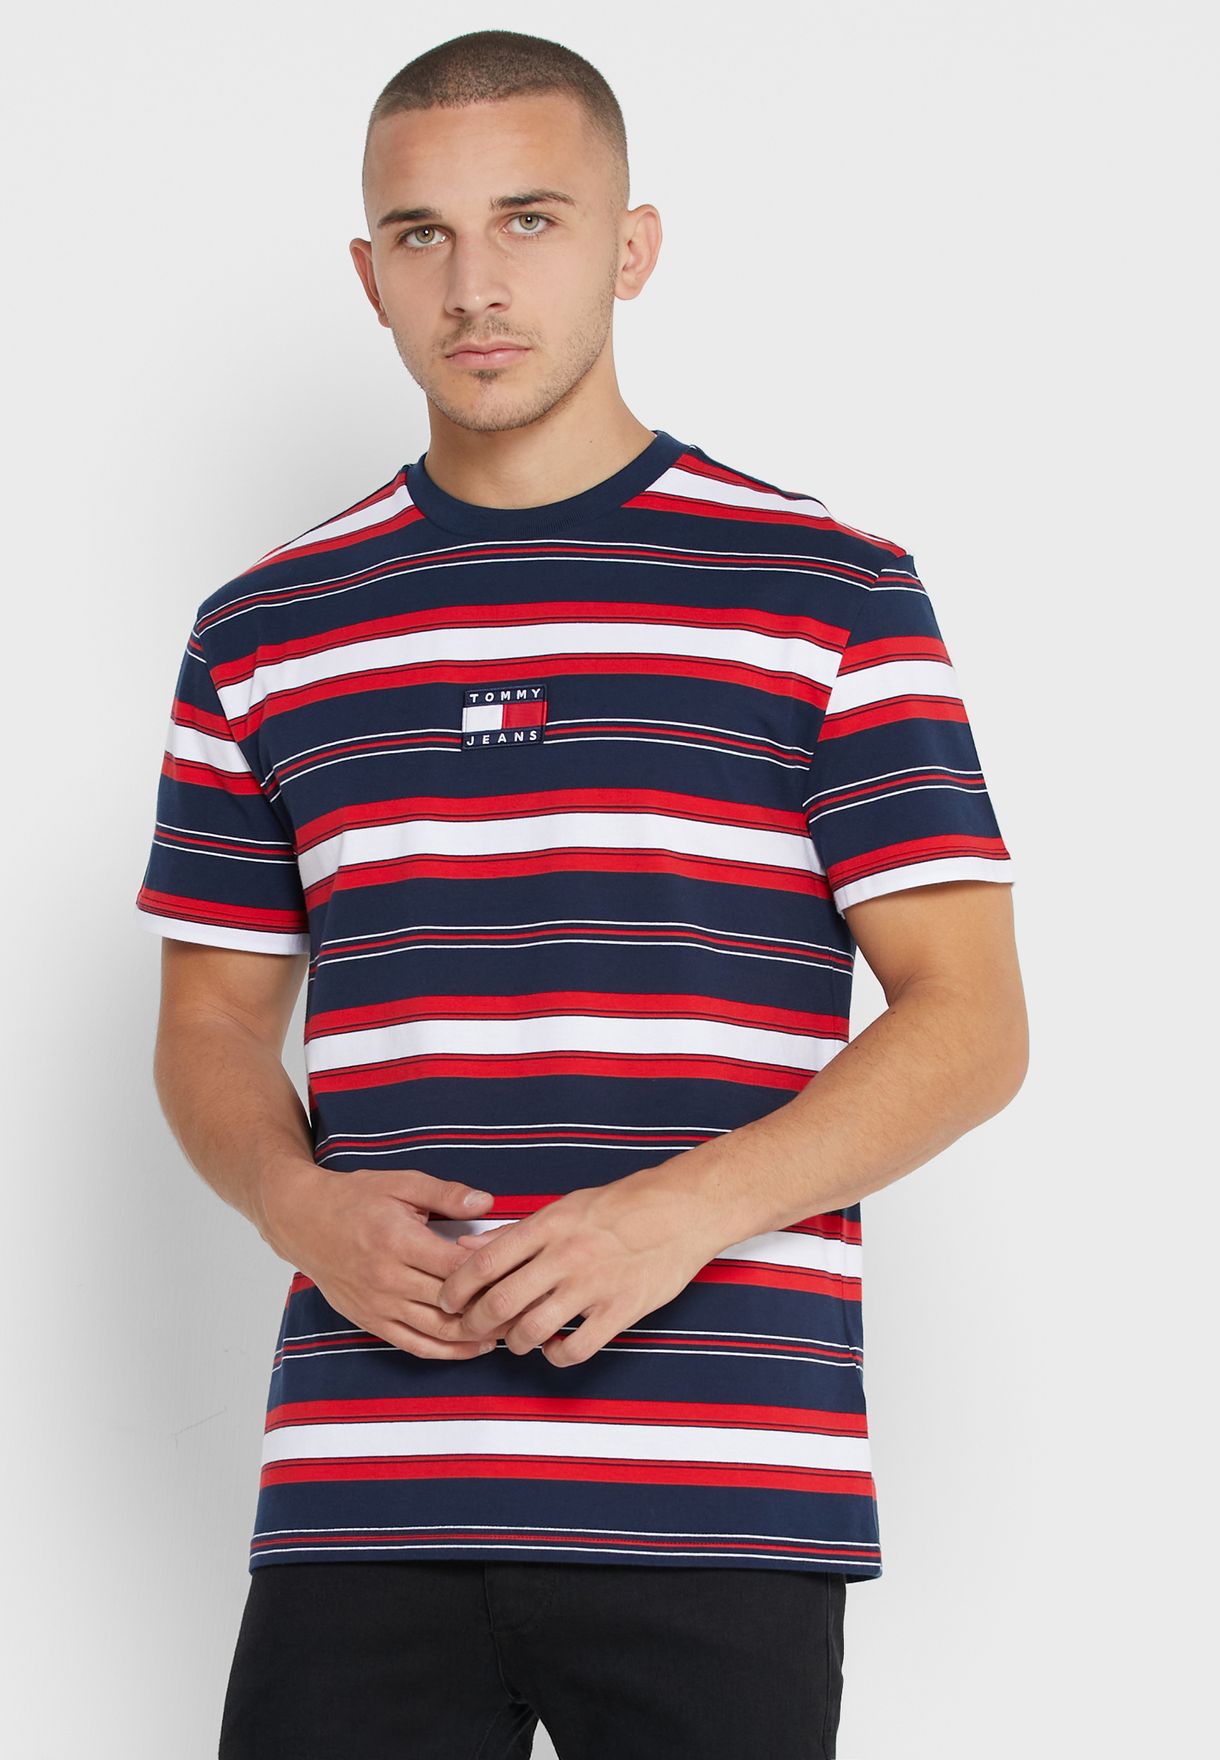 tommy jeans t shirt striped